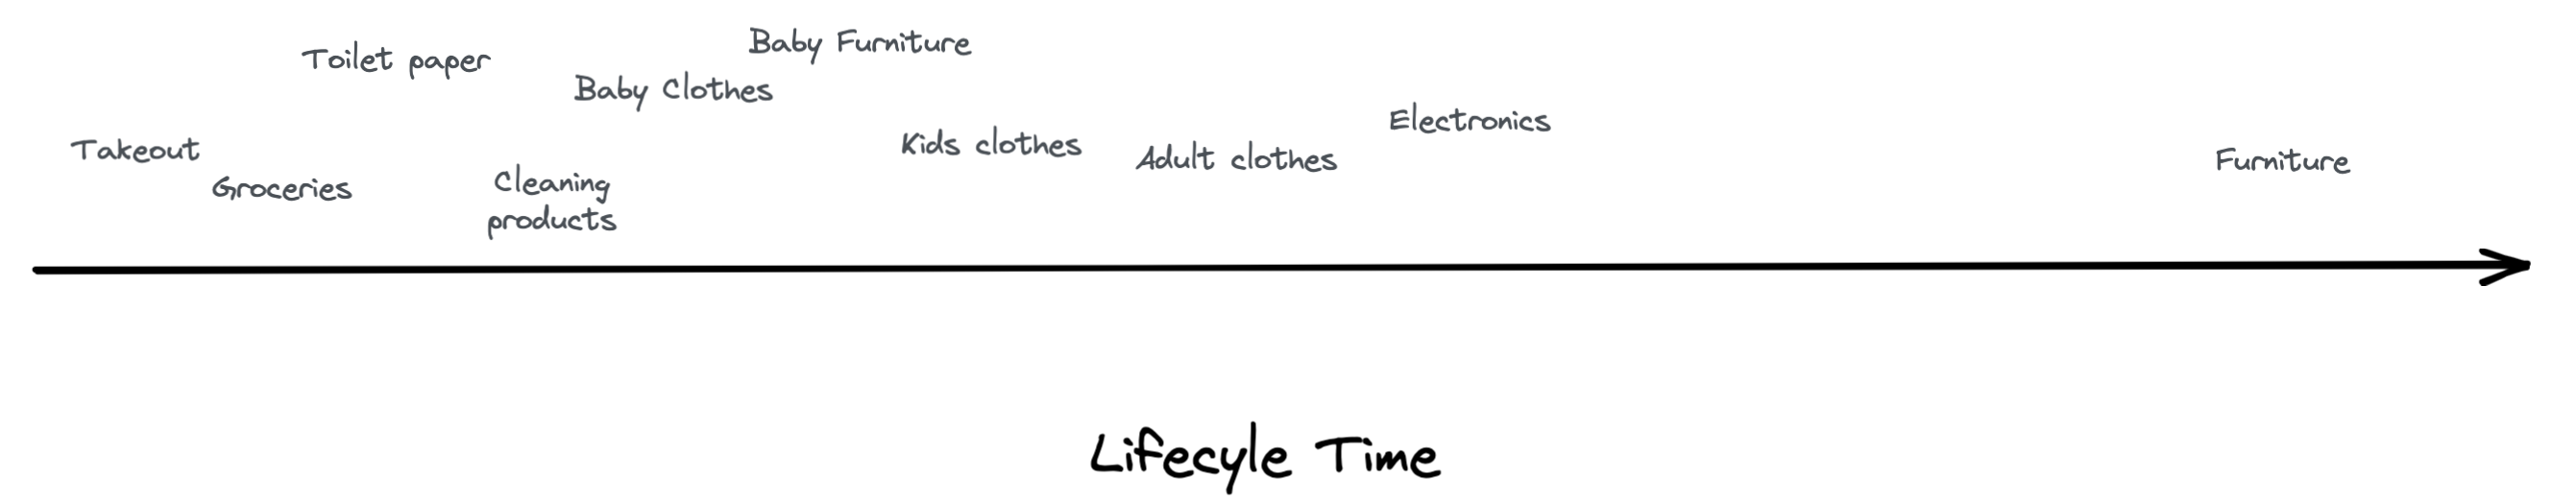 Different objects have different lifecycles, baby stuff moves fast